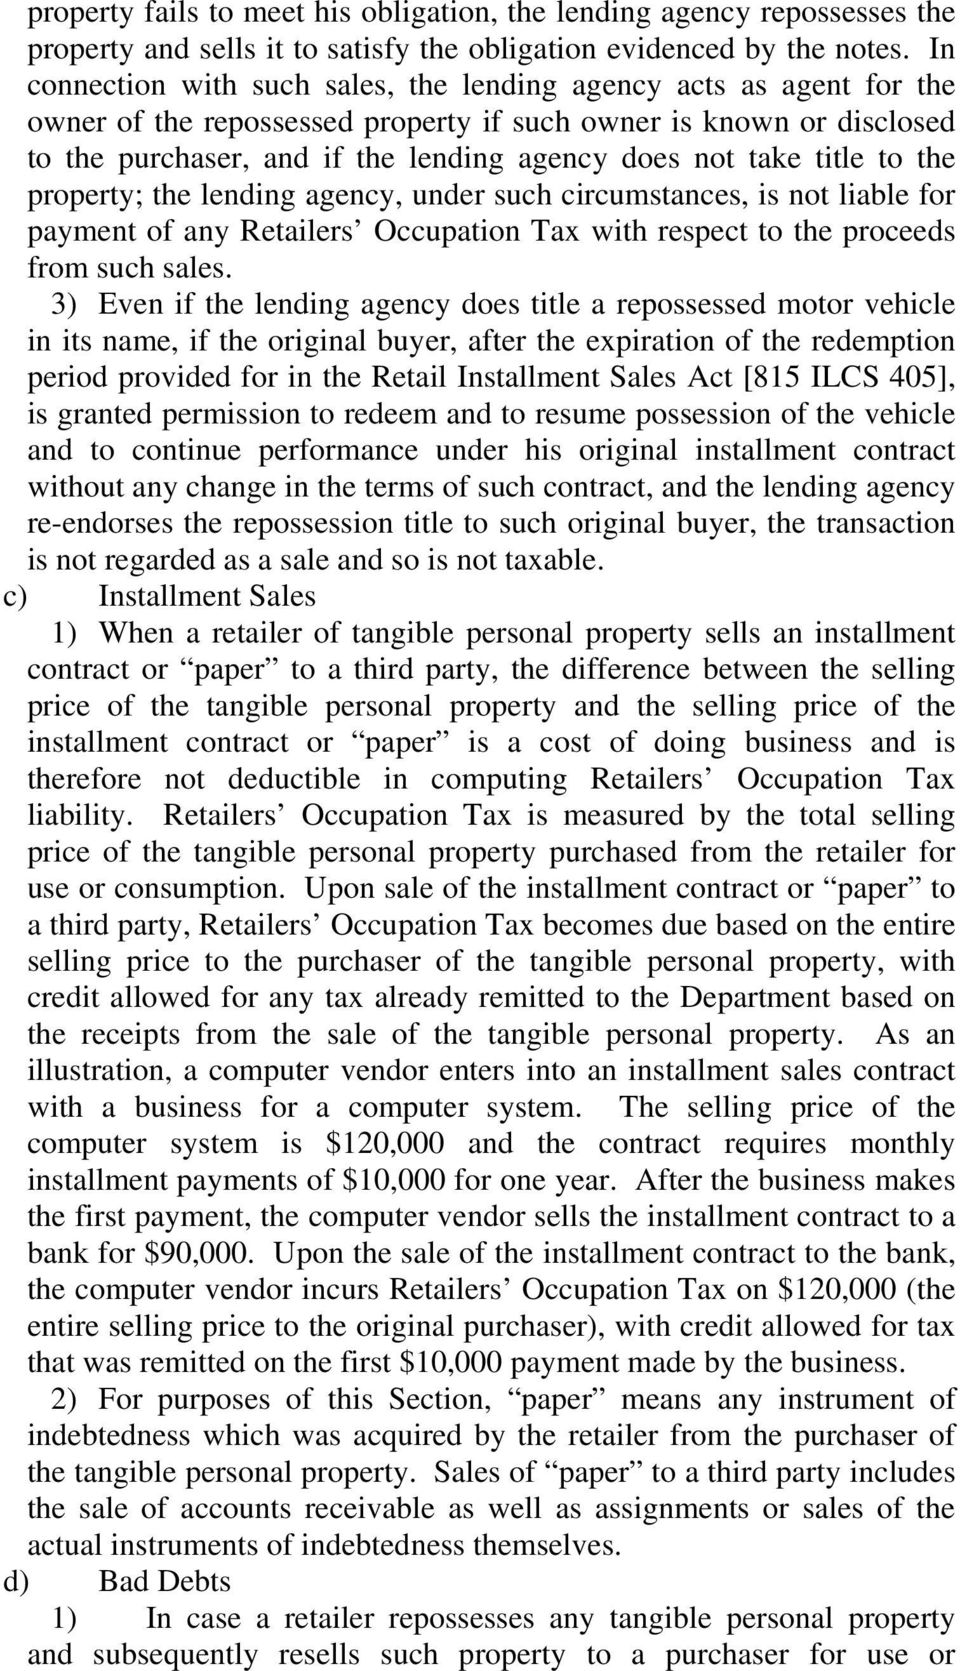 title to the property; the lending agency, under such circumstances, is not liable for payment of any Retailers Occupation Tax with respect to the proceeds from such sales.